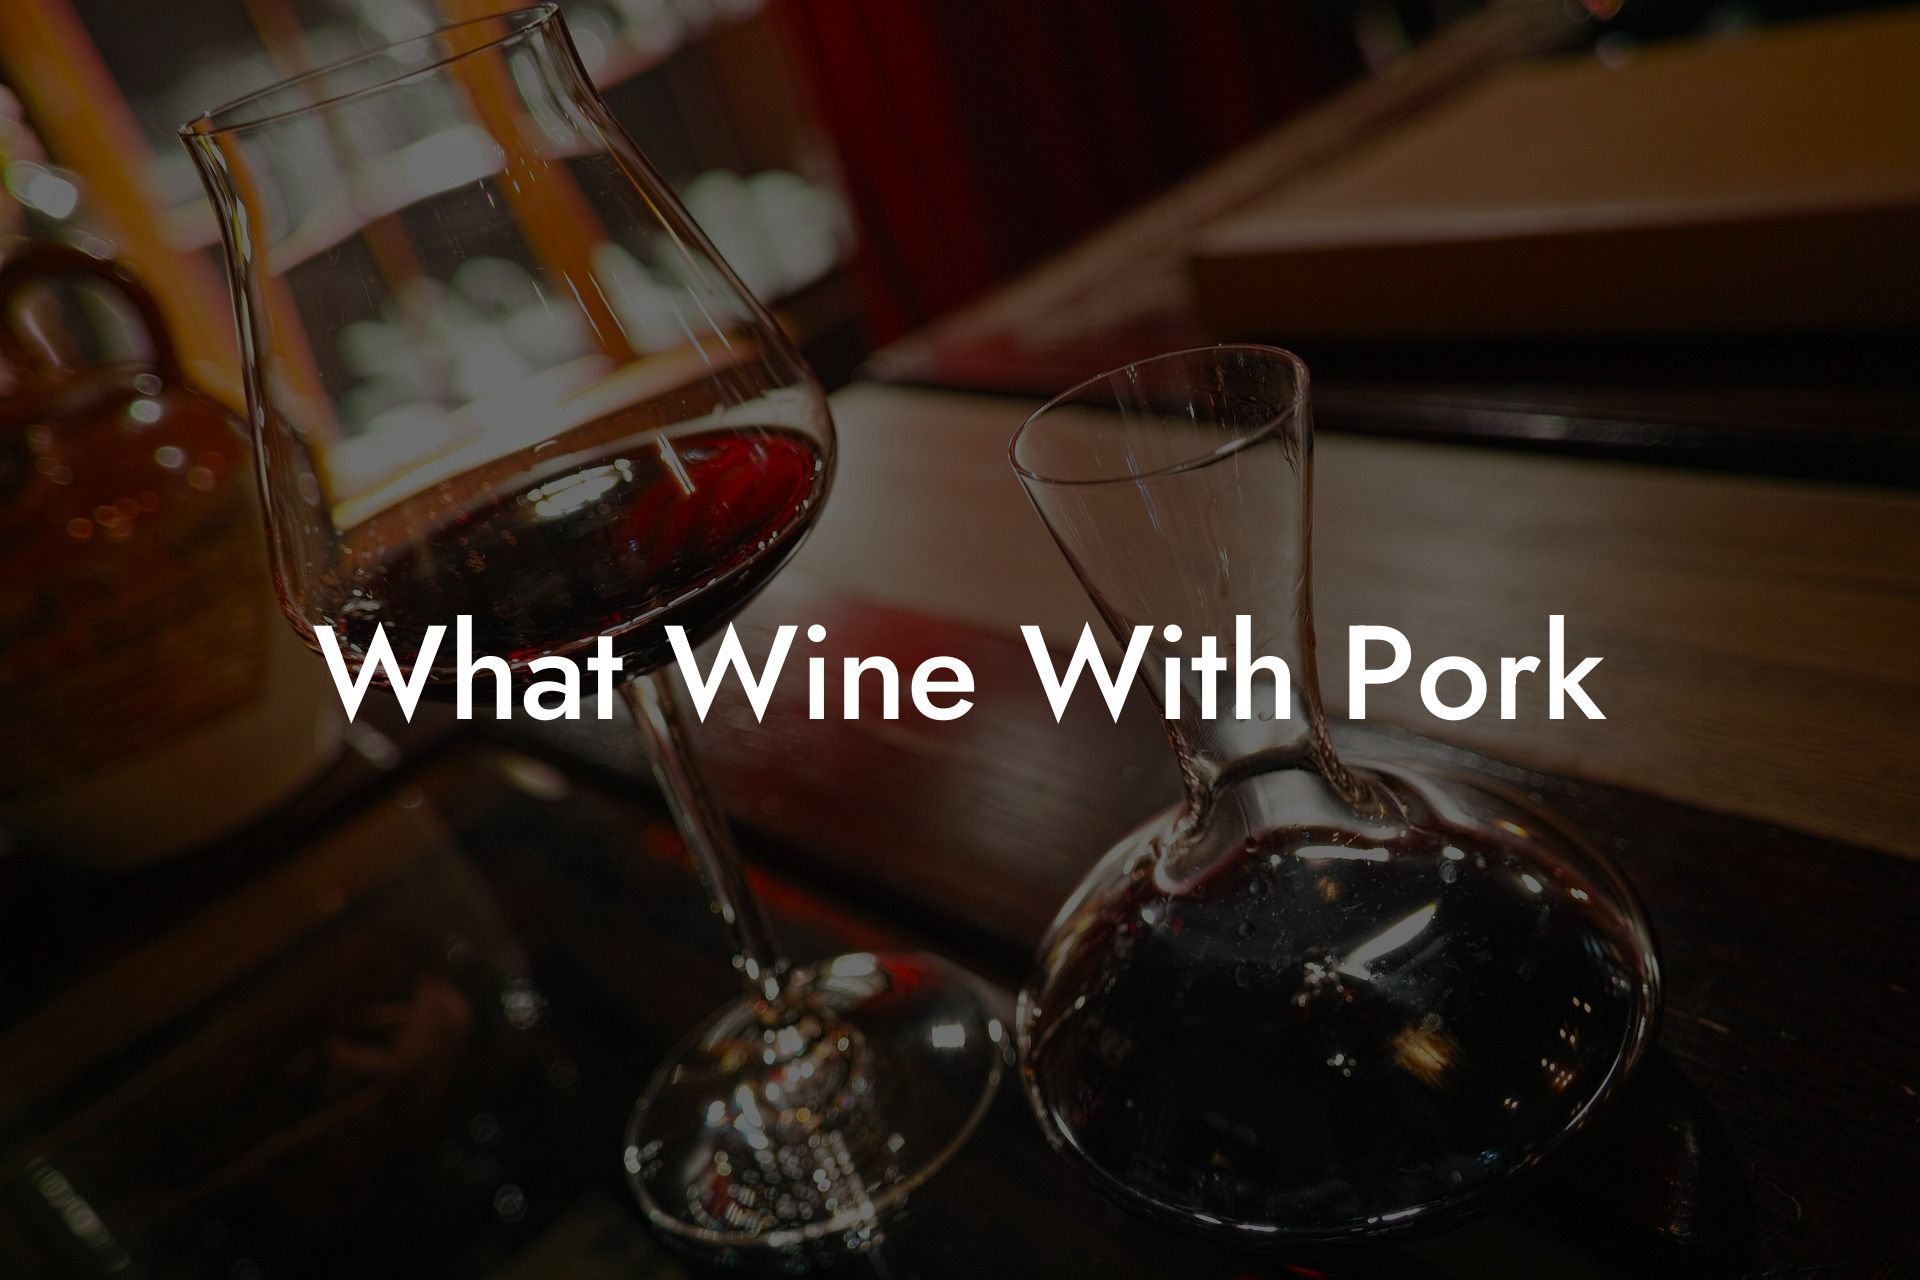 What Wine With Pork